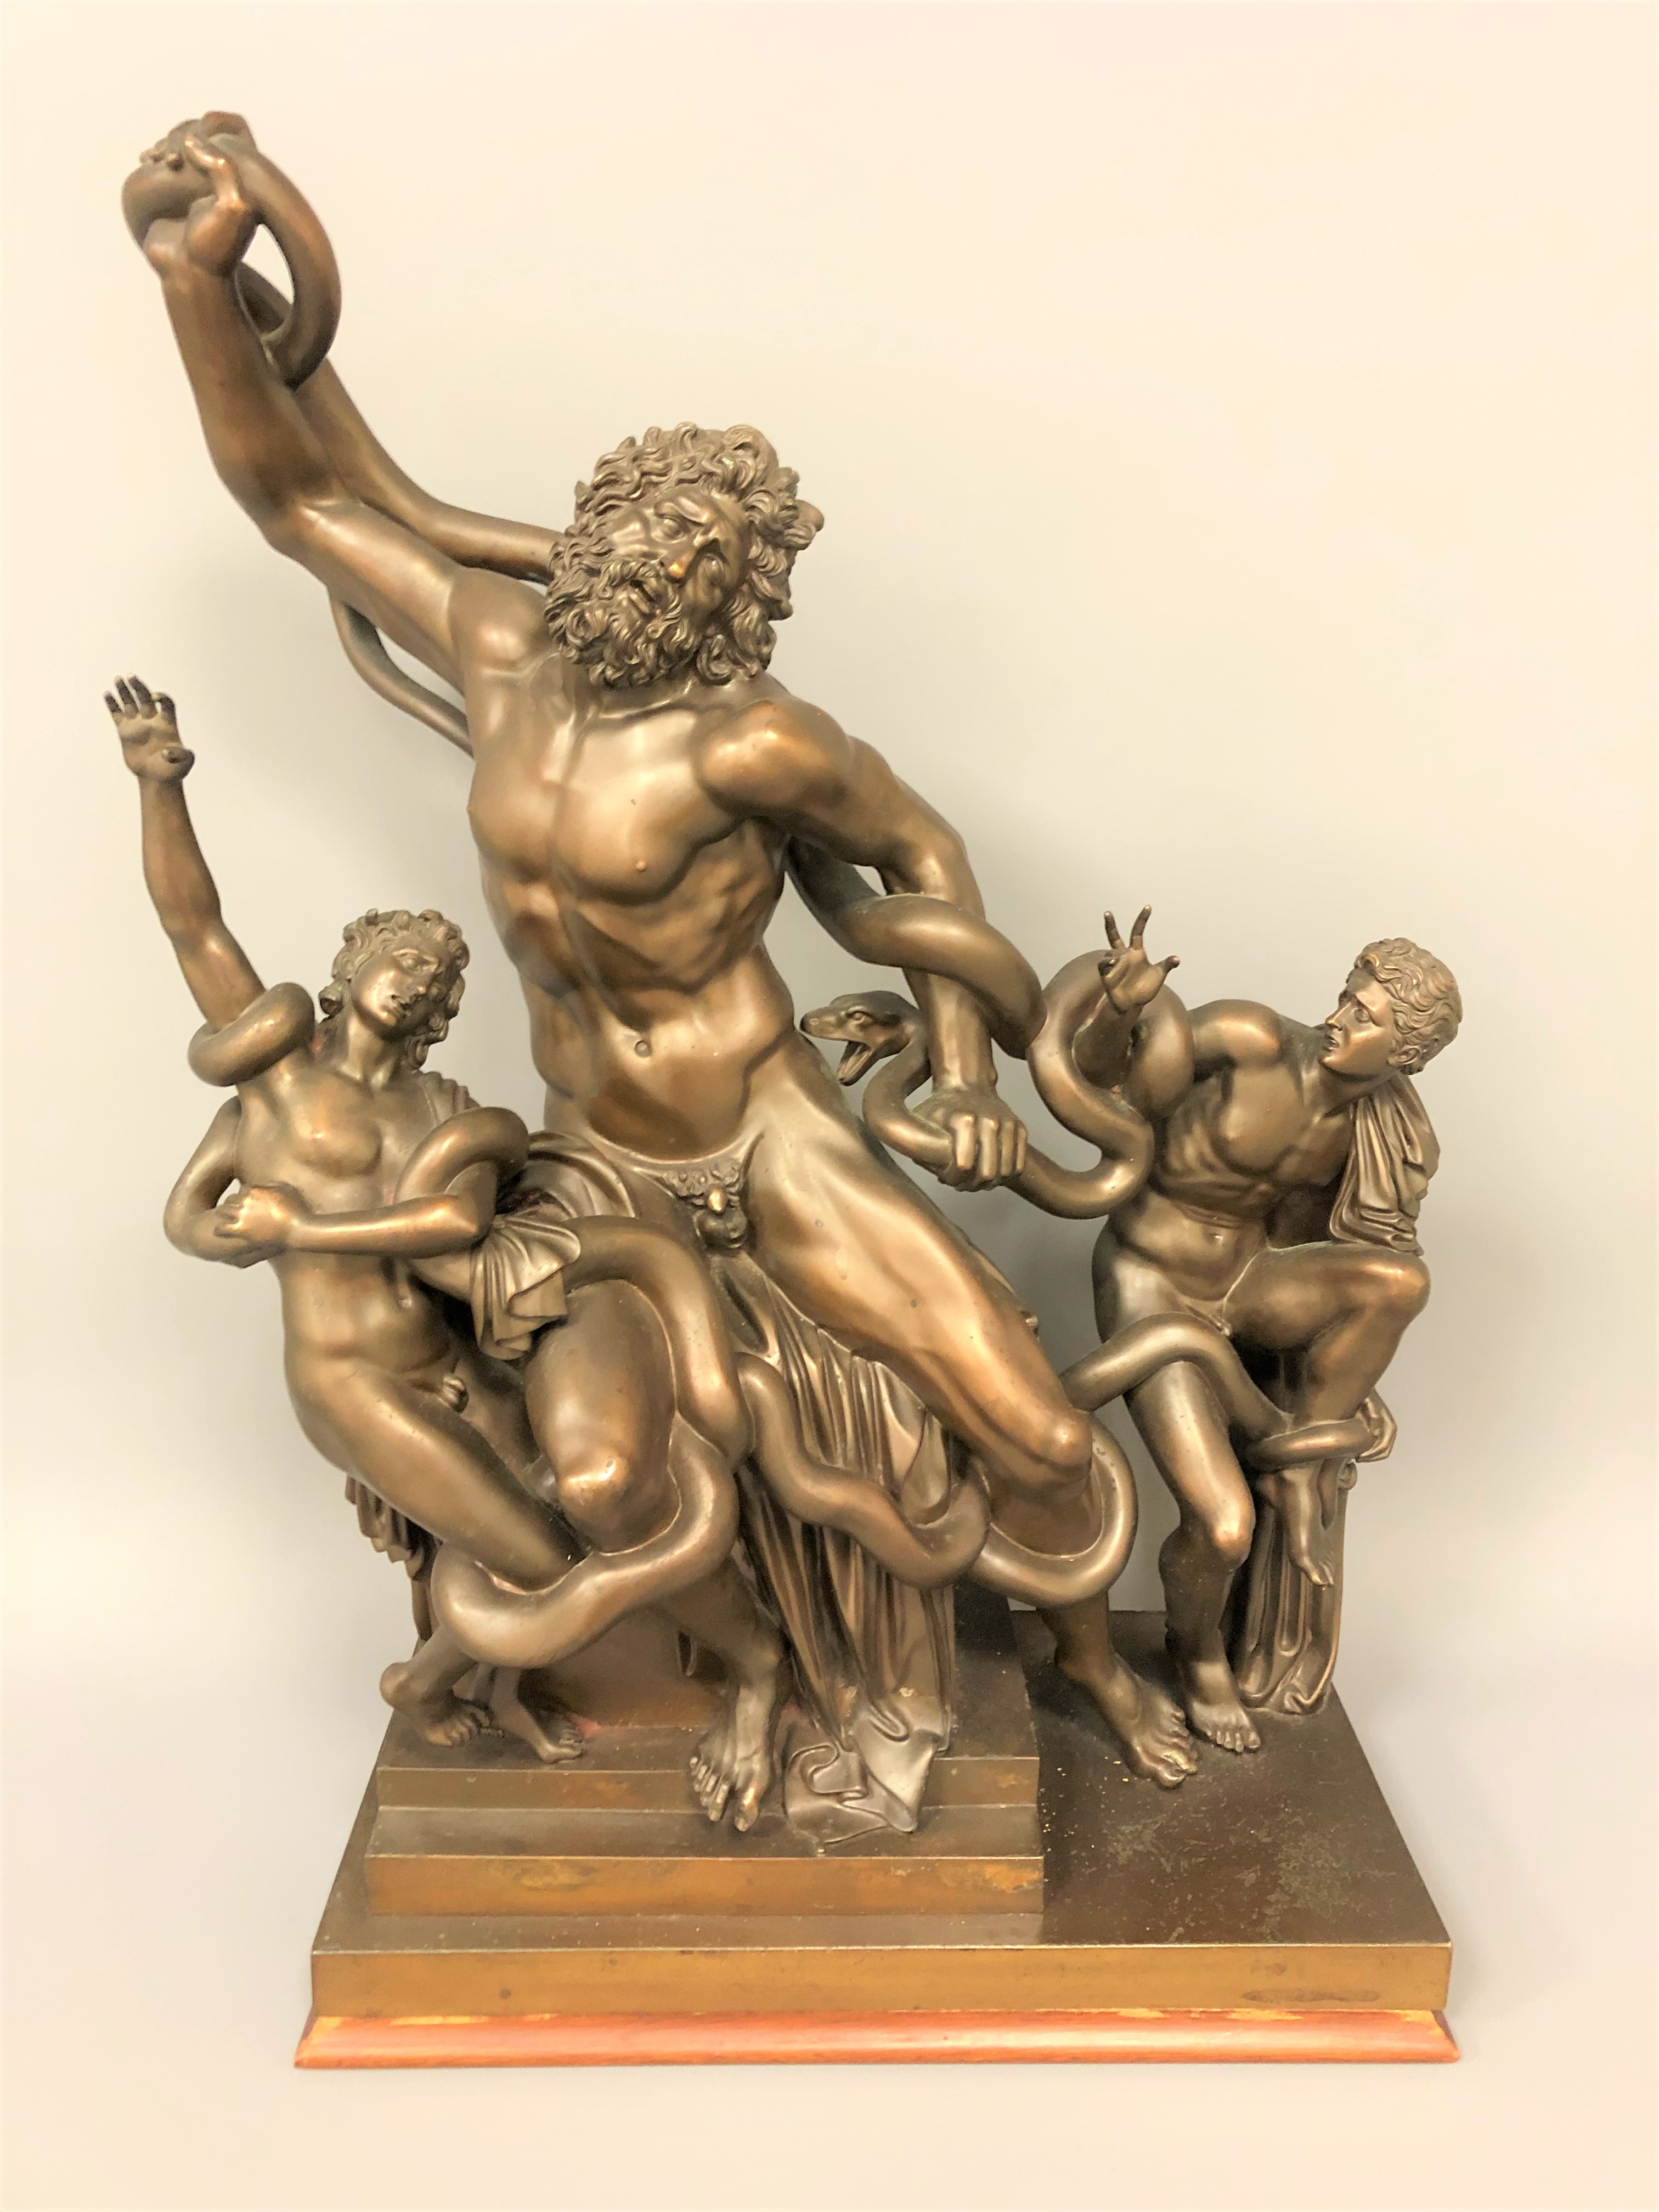 An impressive bronze sculpture depicting Laocoön and his sons being killed by serpents.